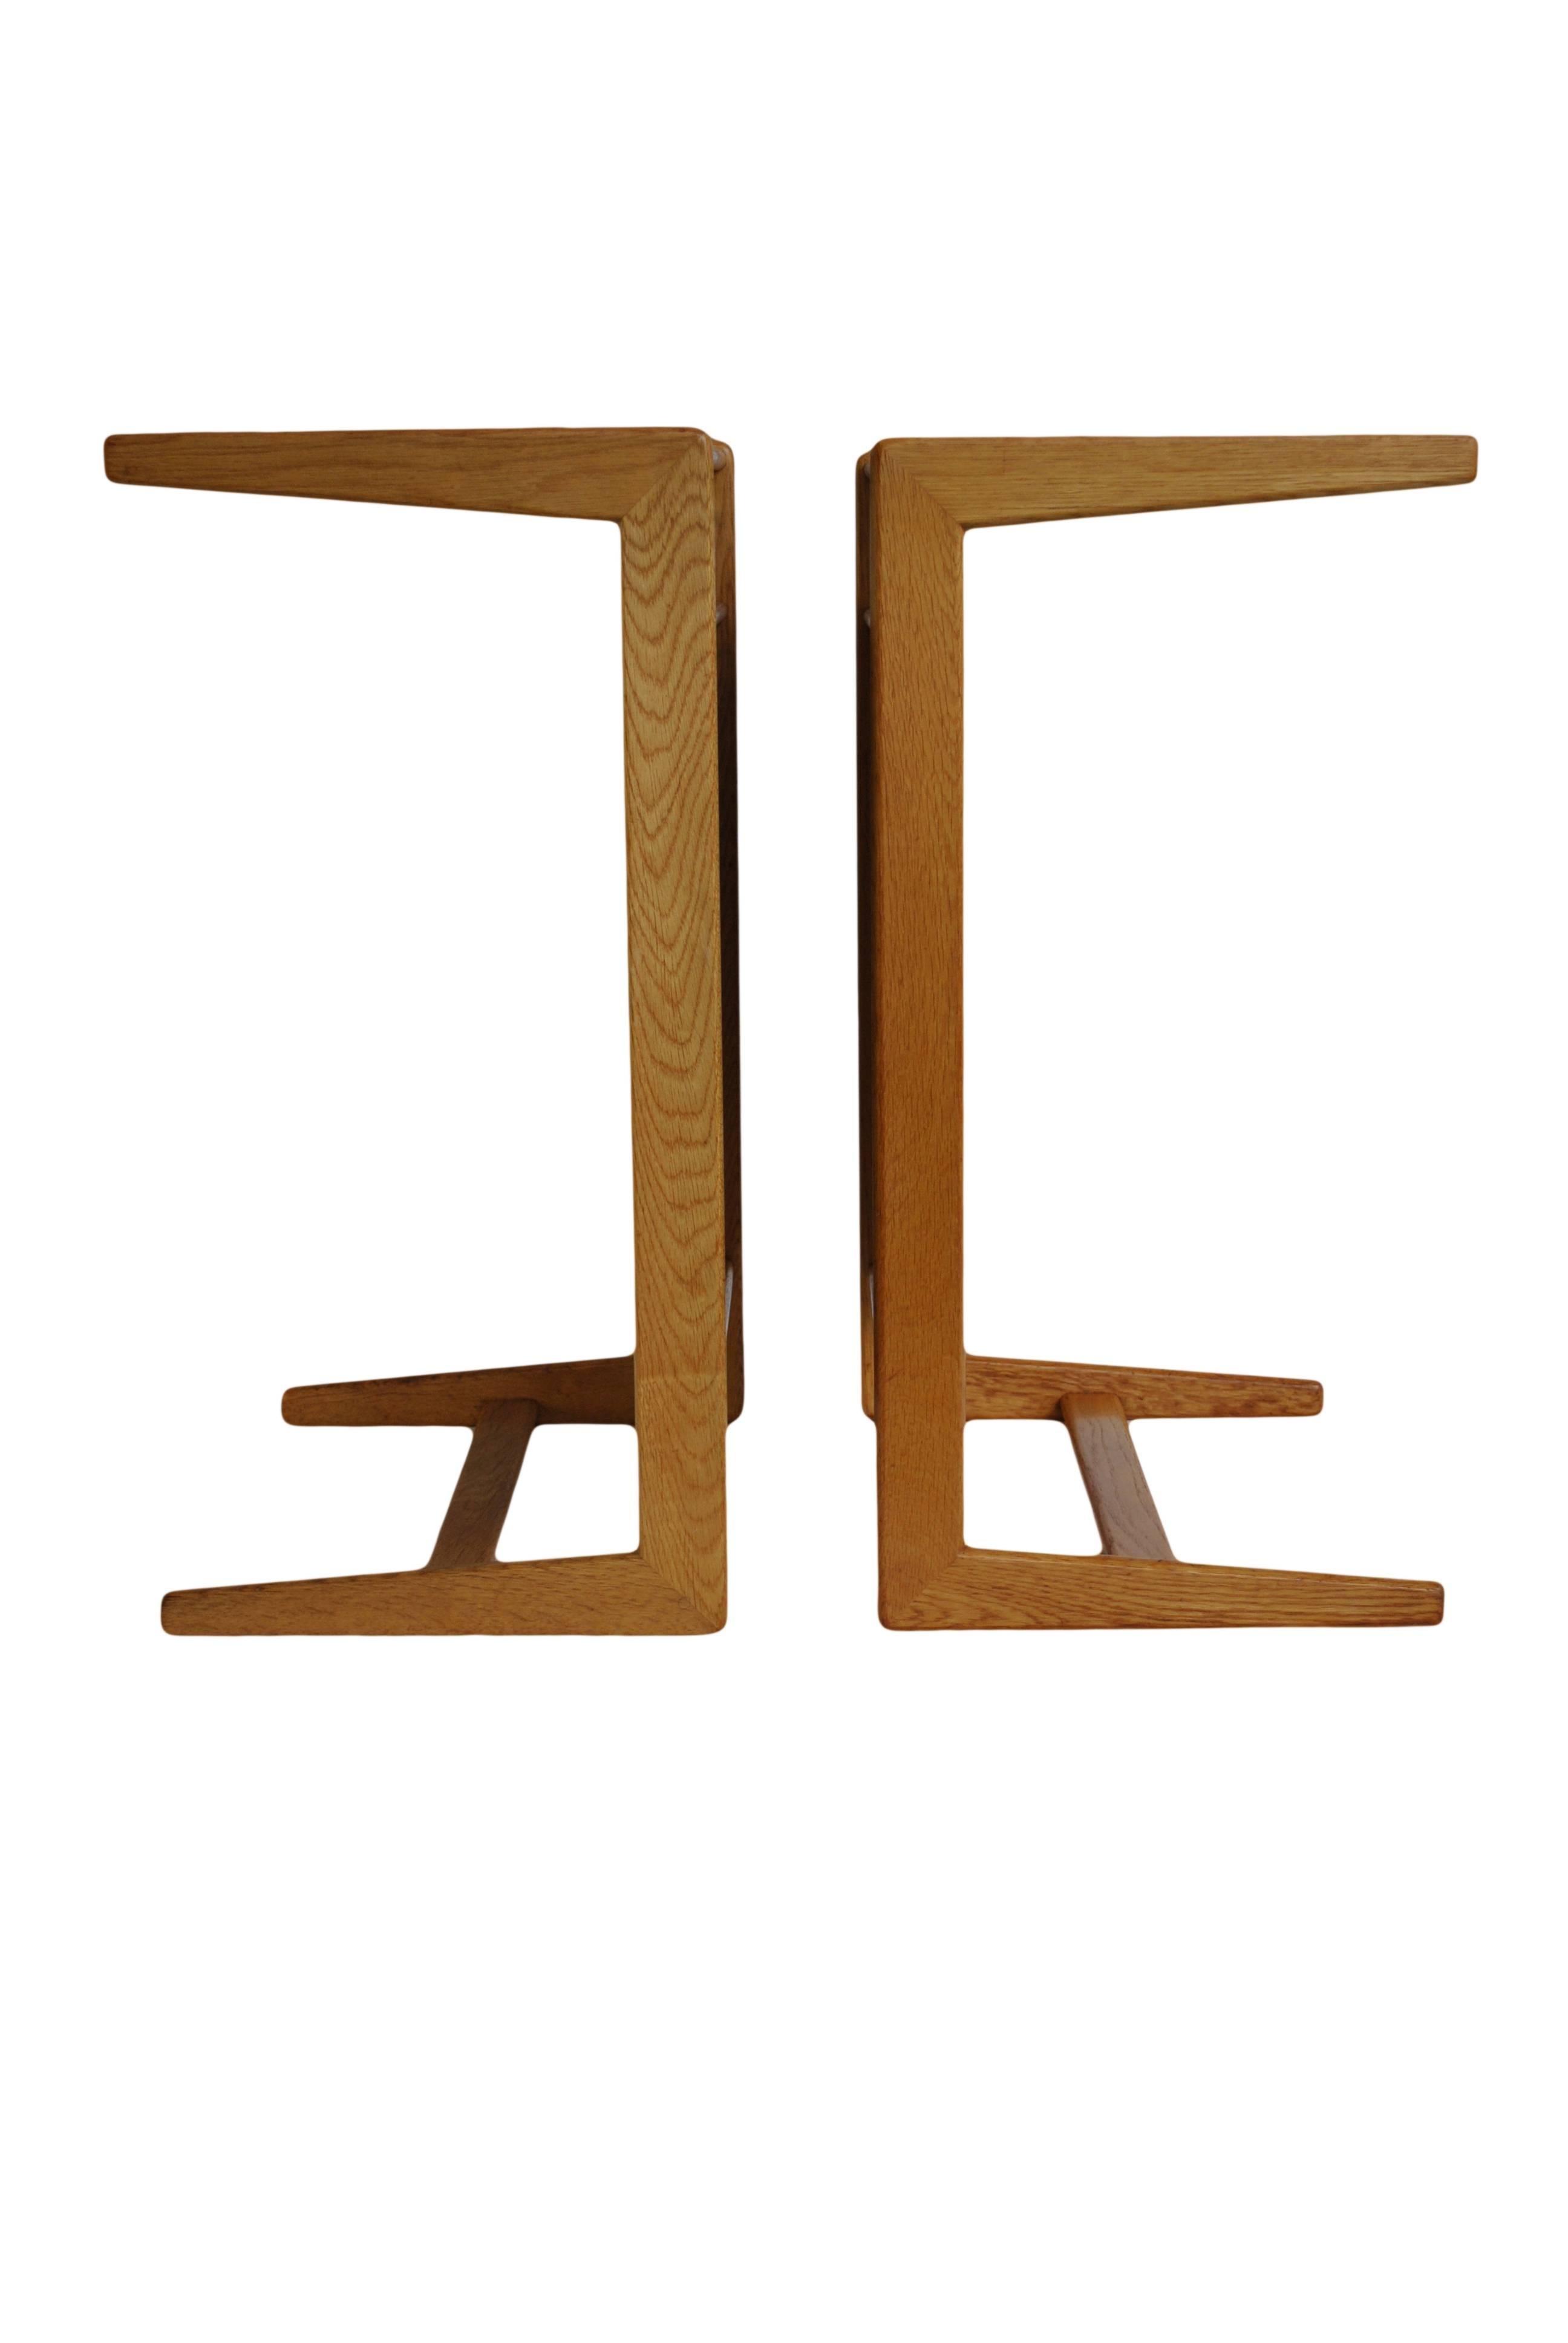 Rare pair of oak and teak nightstands that can also serve as bed tables or trays. Wonderfully simplistic modernist design from Yngvar Sandstrom for Nordiska Kompaniet, Sweden, circa 1960s.
Great condition throughout.